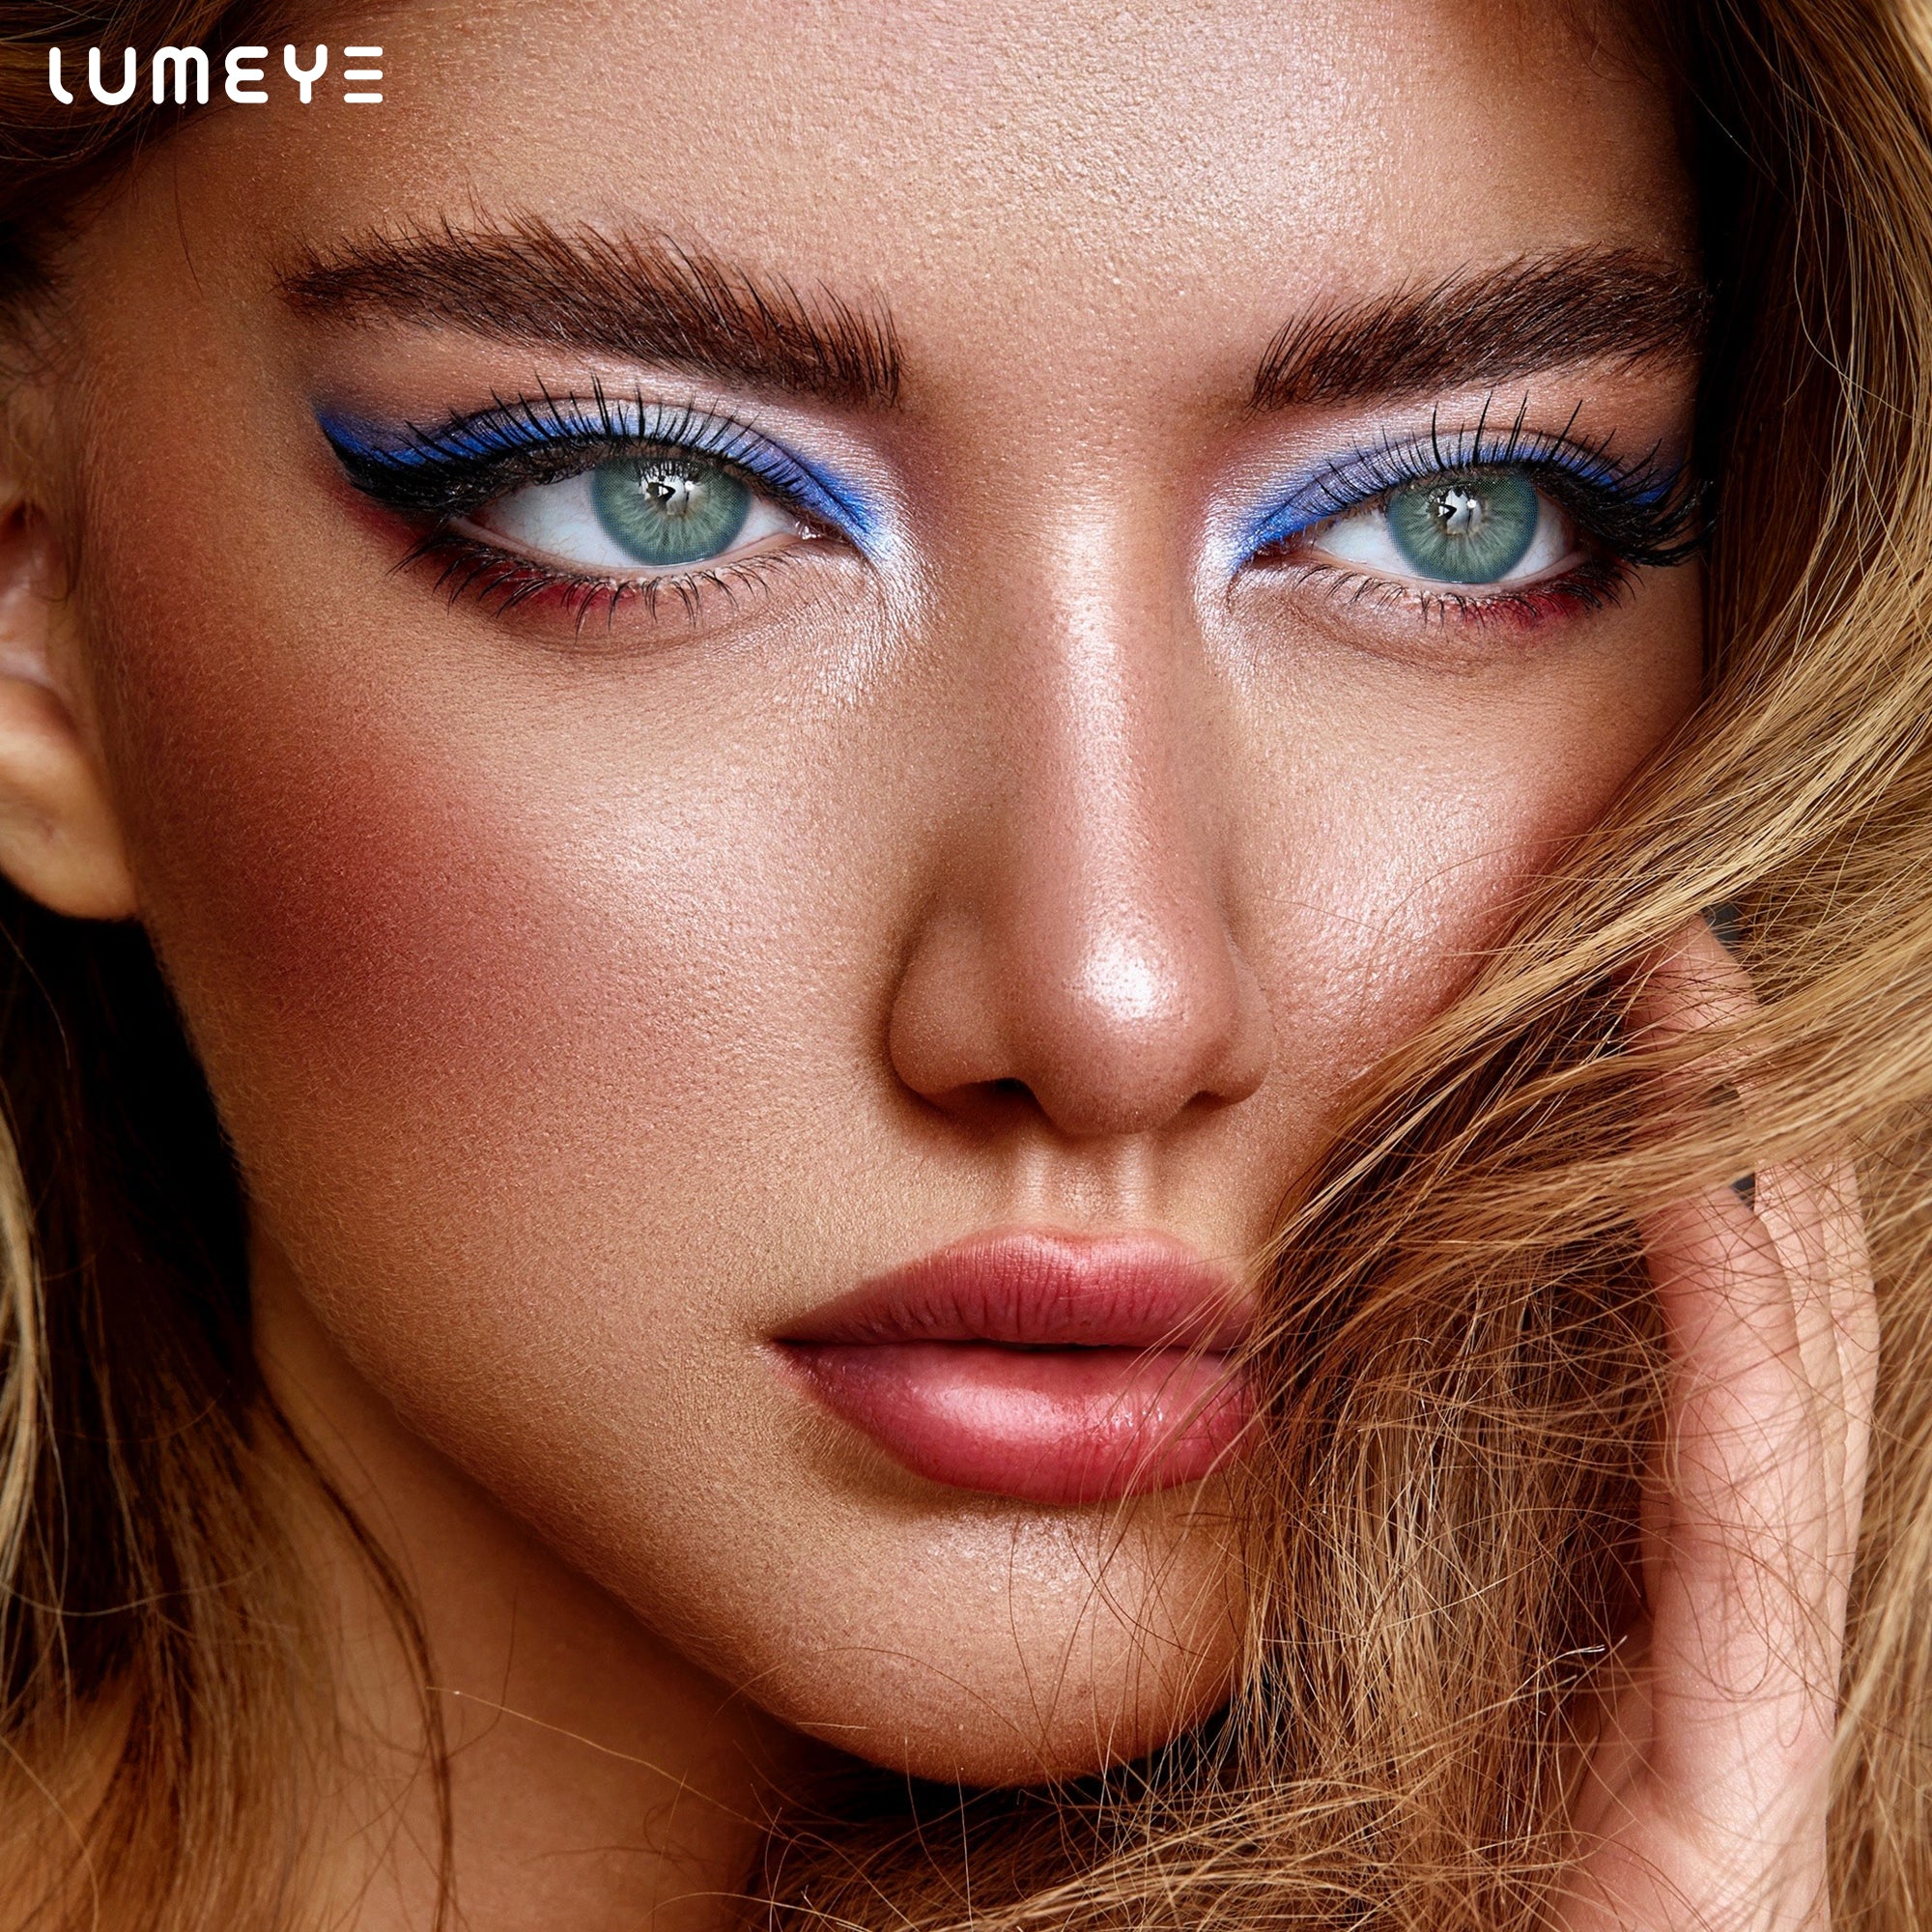 Best COLORED CONTACTS - LUMEYE Lime Blue Colored Contact Lenses - LUMEYE